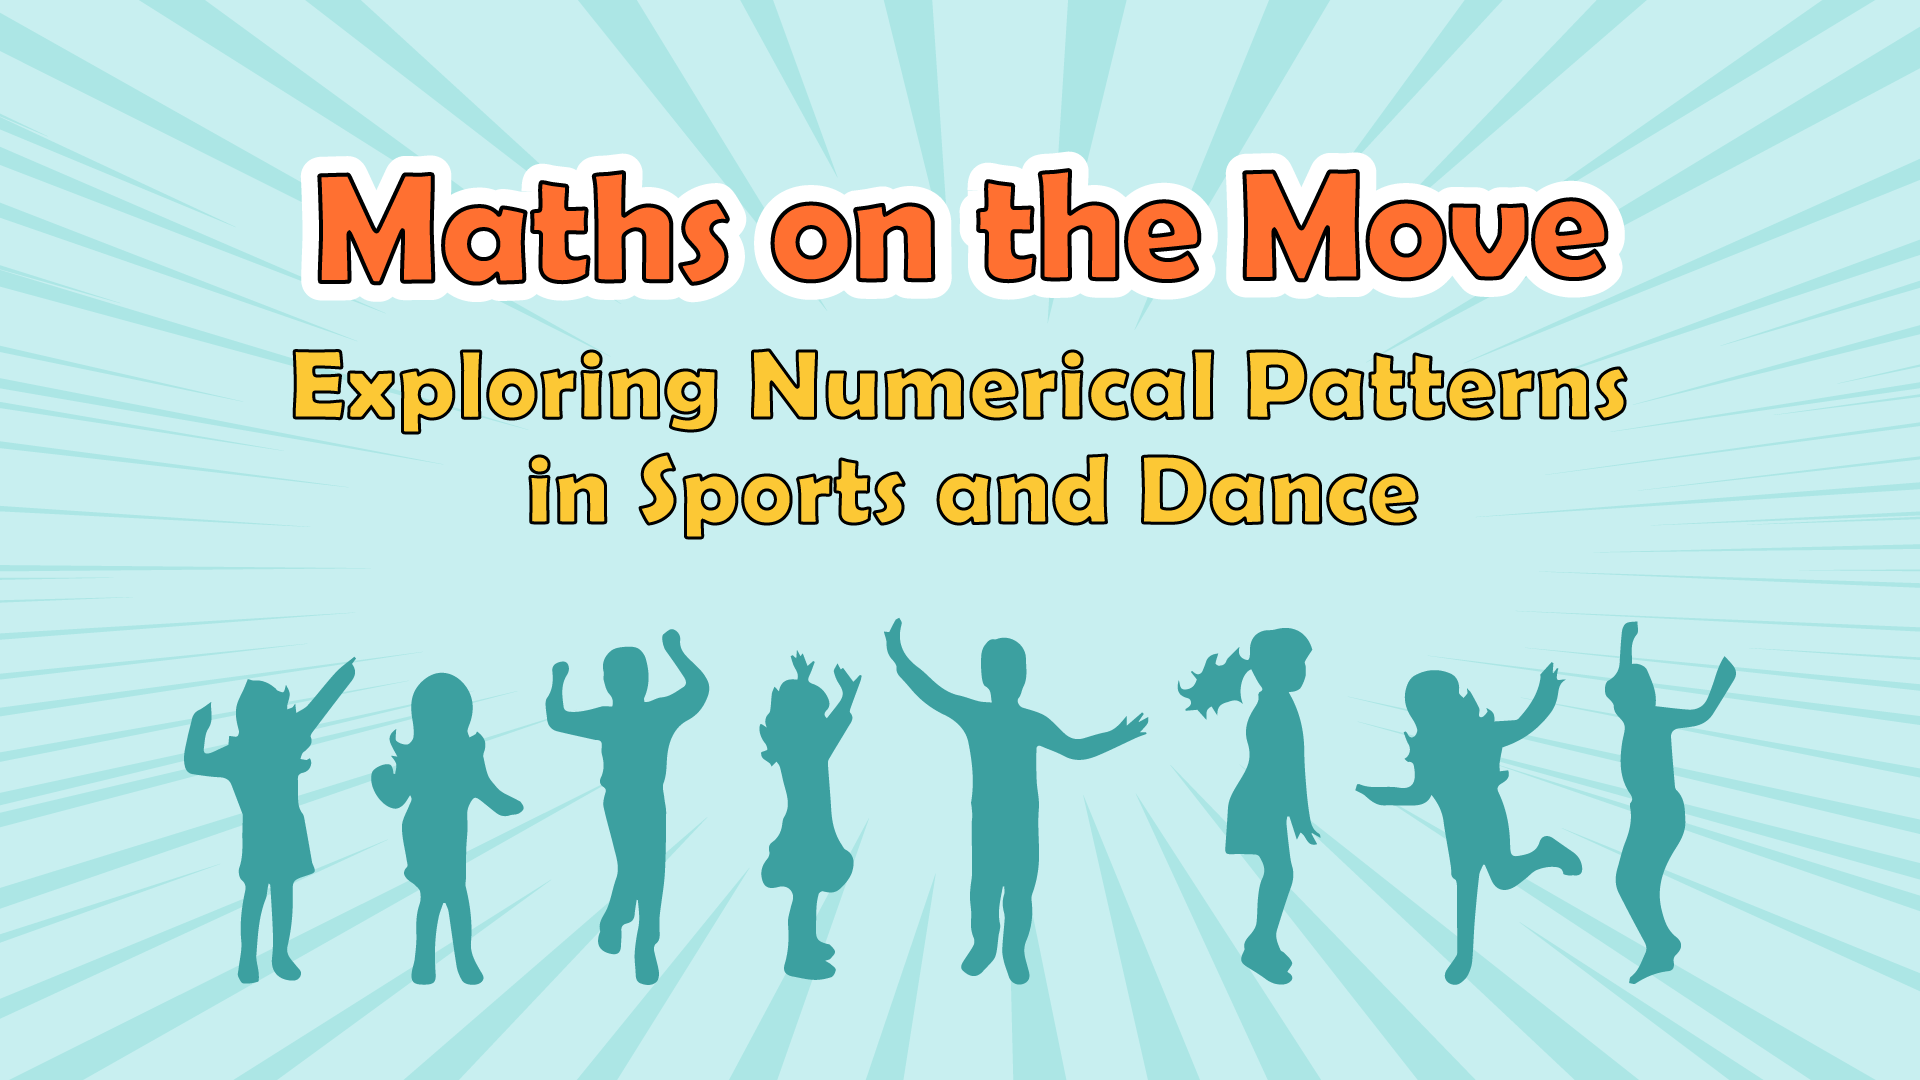 Maths on the Move: Exploring Numerical Patterns in Sports and Dance